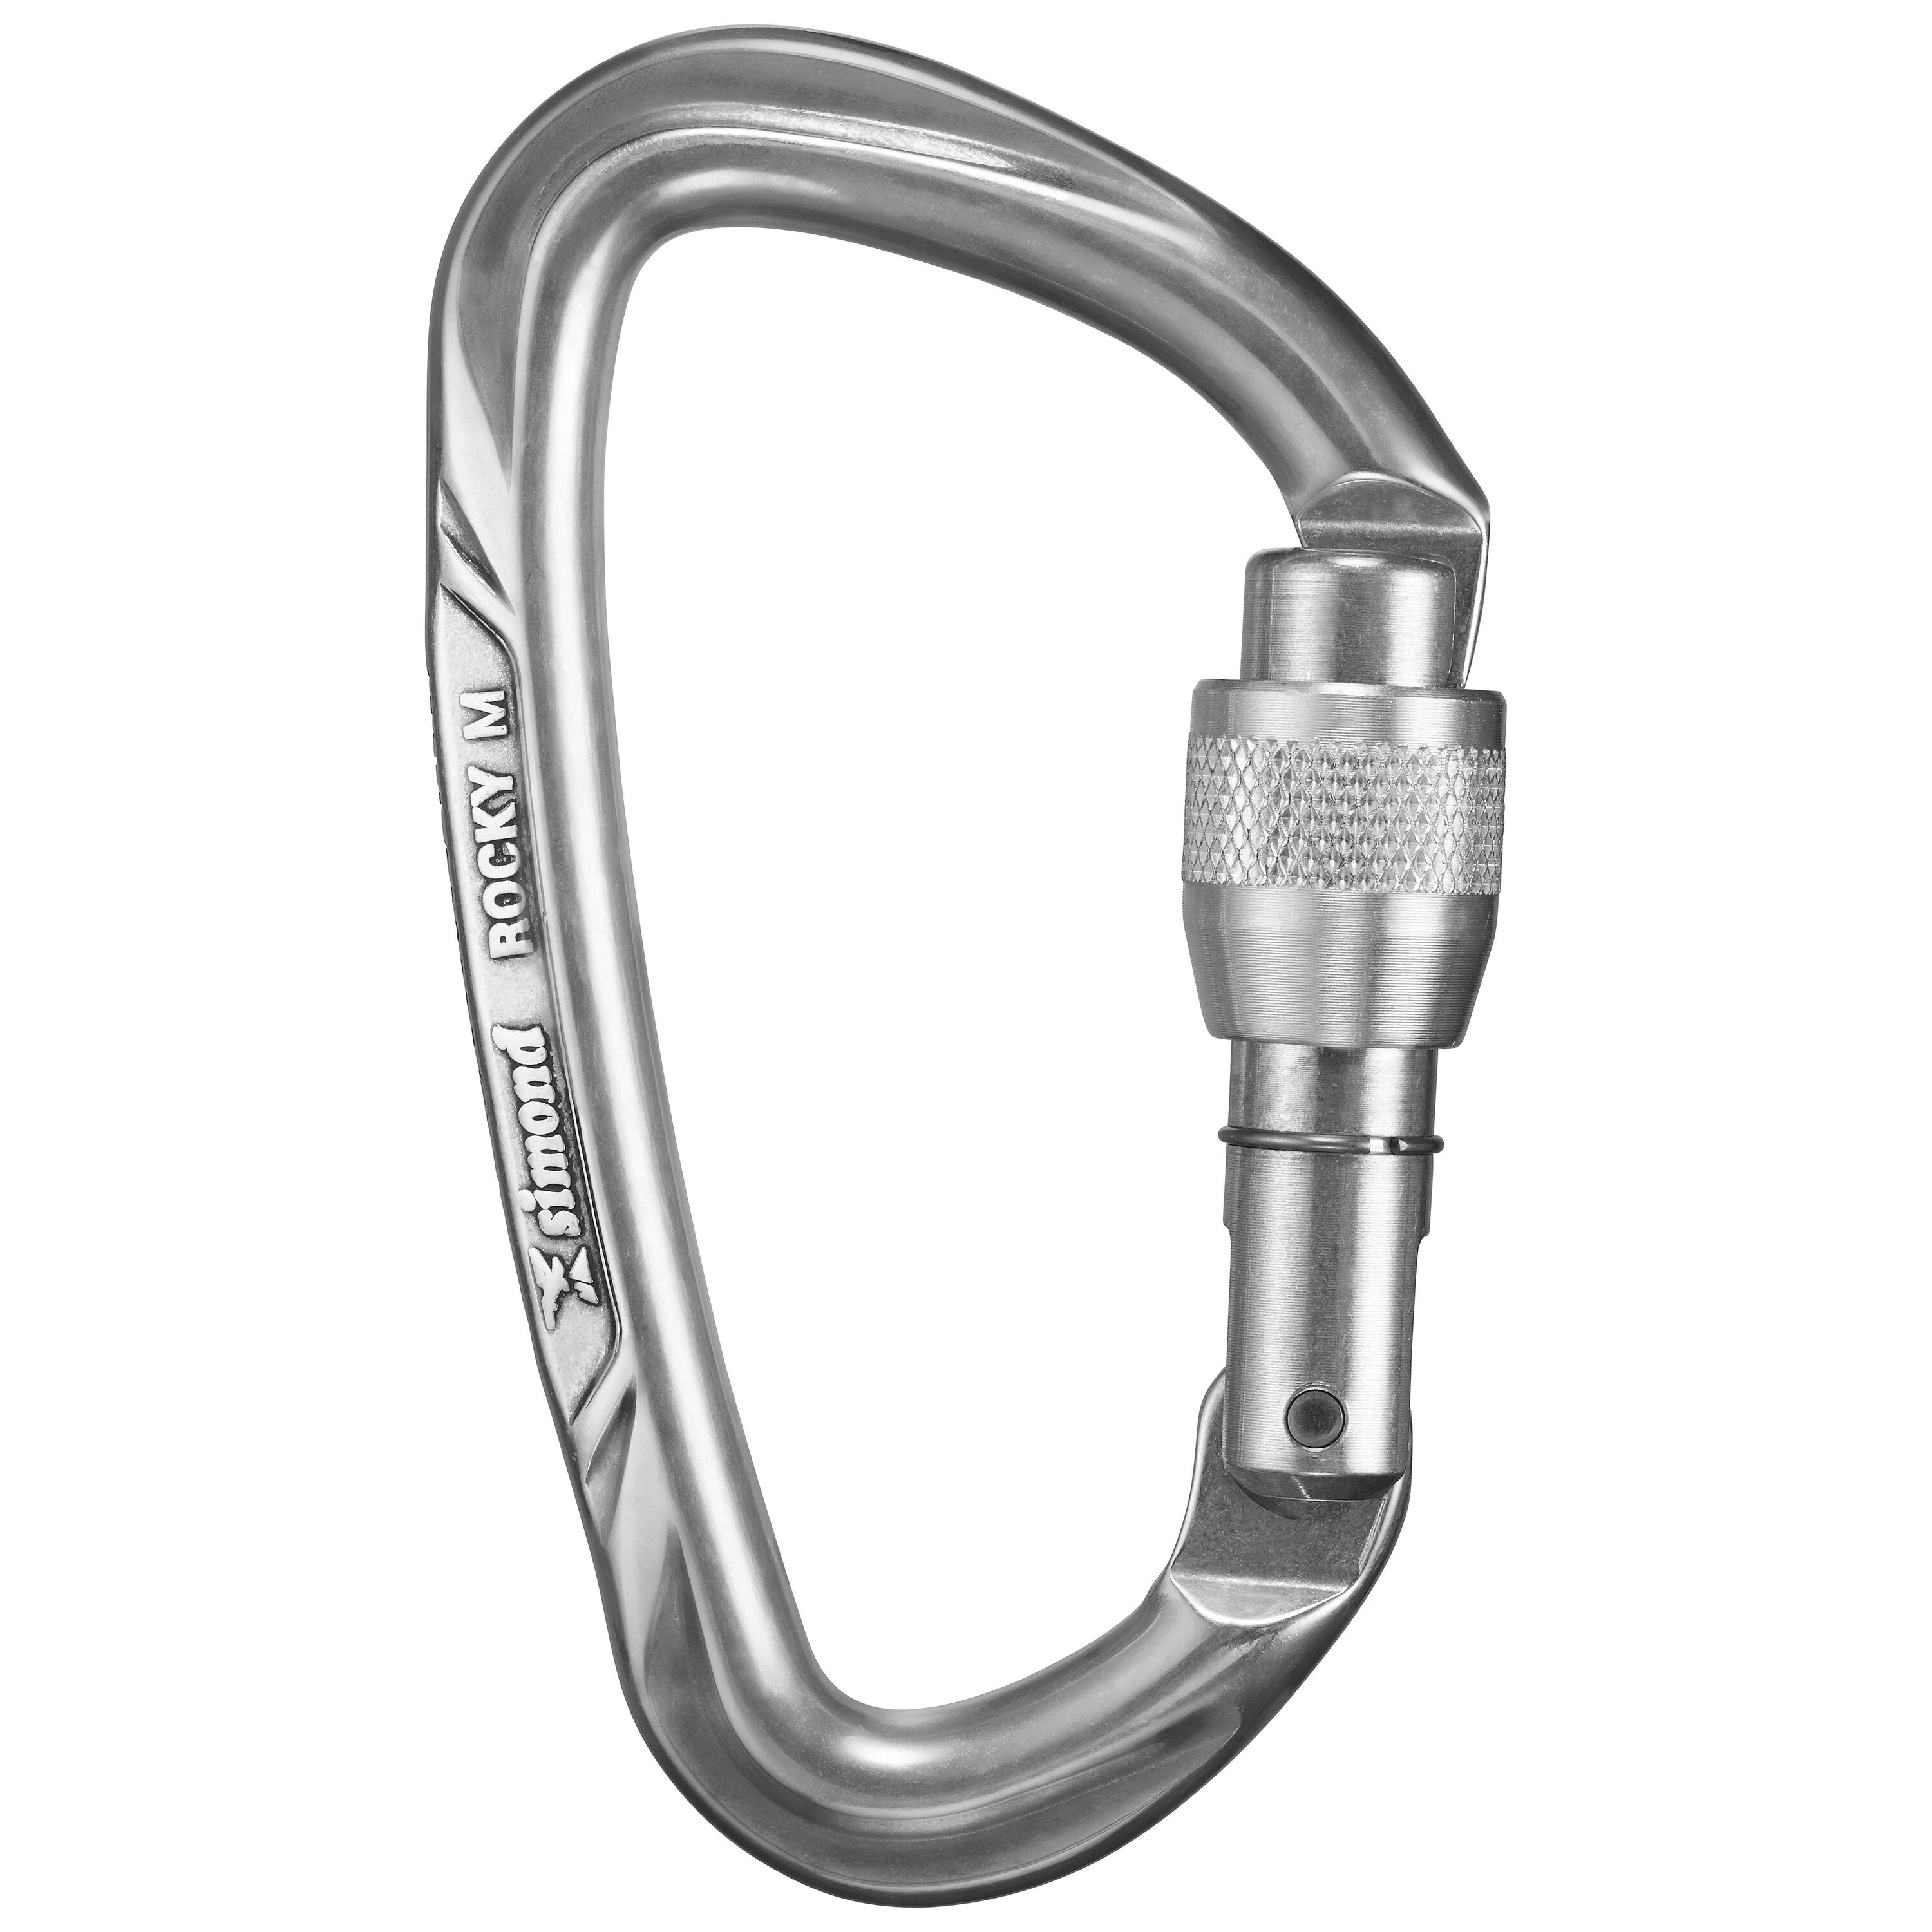 SIMOND CLIMBING AND MOUNTAINEERING SCREWGATE CARABINER - ROCKY M POLISHED